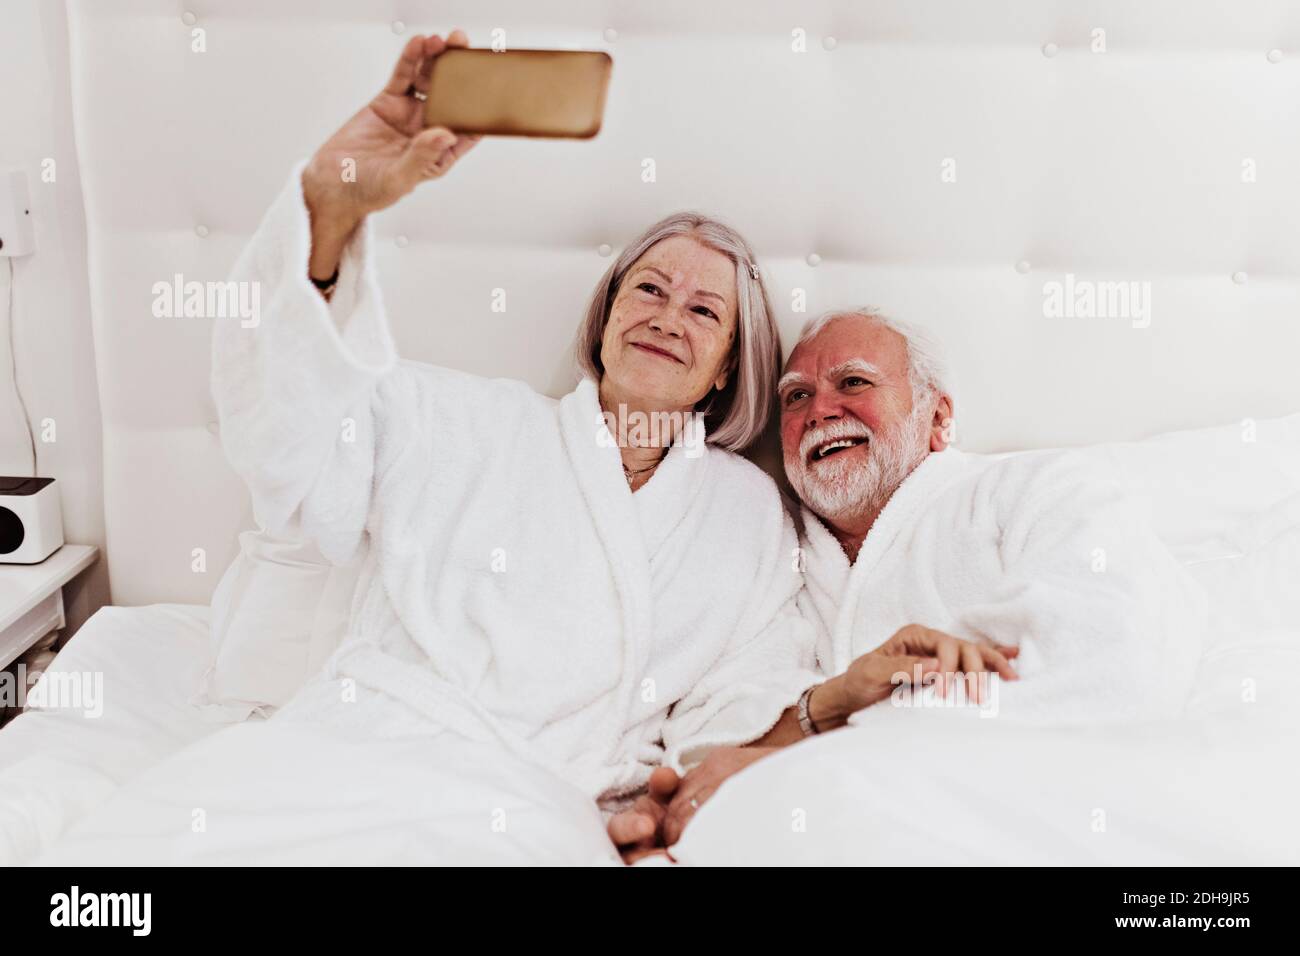 Smiling senior woman taking selfie through mobile phone with man while lying on bed in hotel room Stock Photo